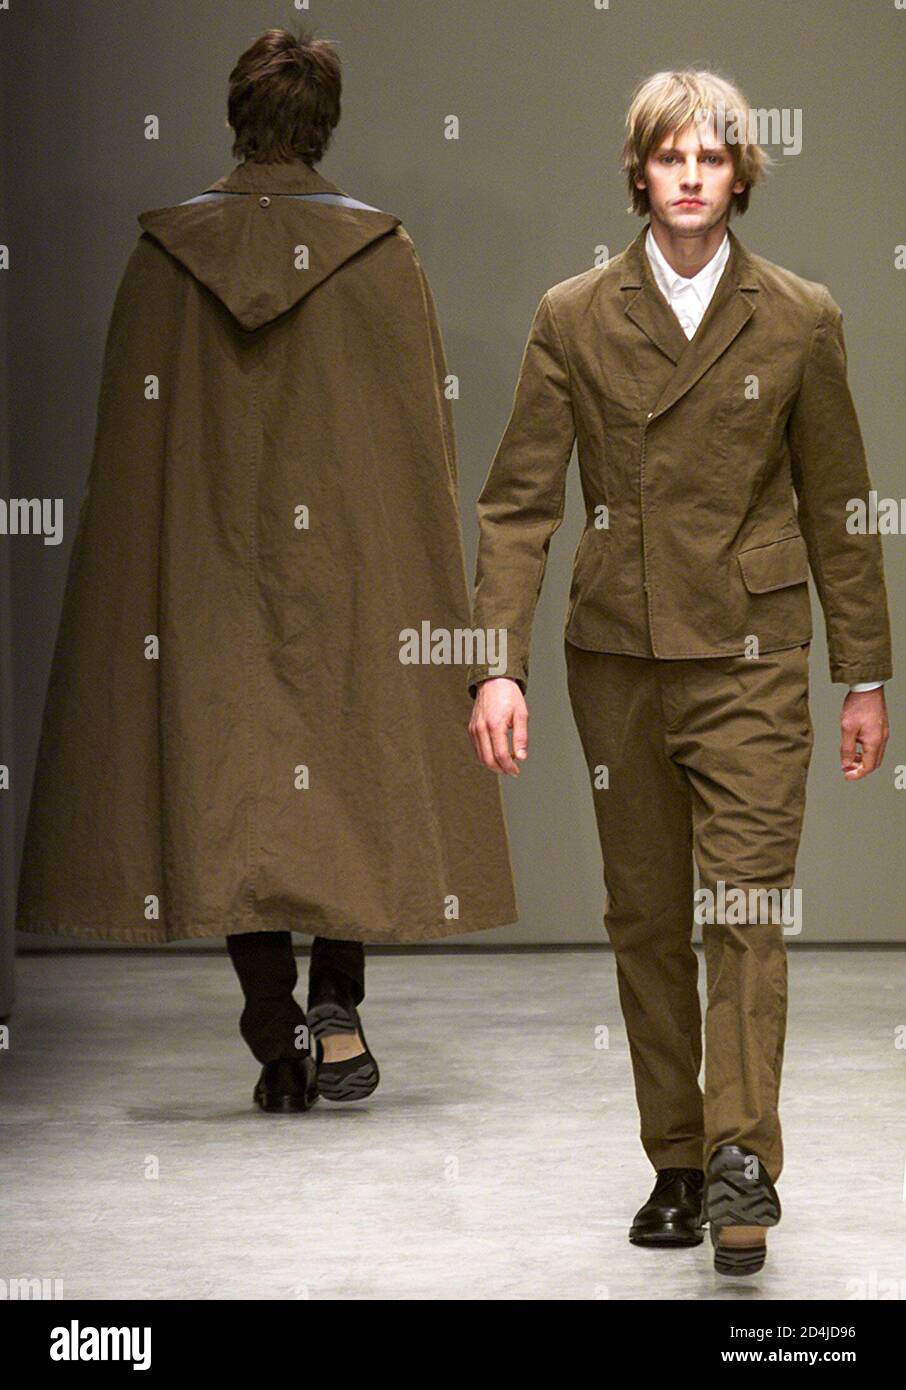 Two models wear a long cloak and a dressed as part of Miu-Miu Autumn/Winter  ready-to-wear men's collection 2001 in Milan January 14, 2001. The Milan  fashion show will run until January 18